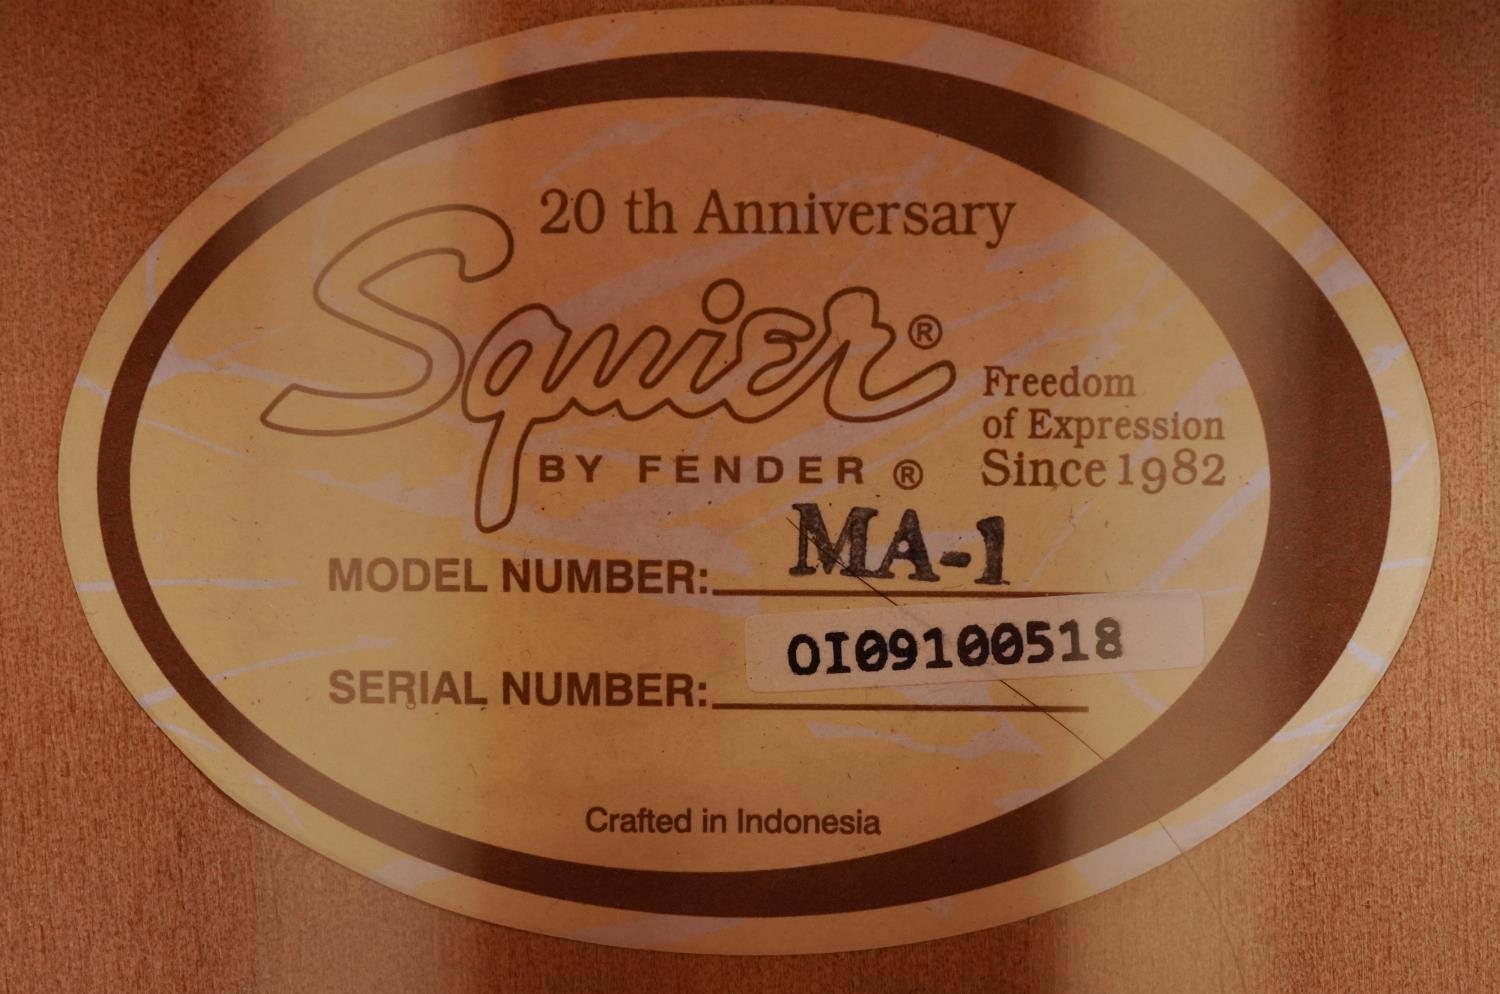 Squier by Fender six string acoustic 20th Anniversary acoustic guitar model MA-1, serial number - Image 2 of 4